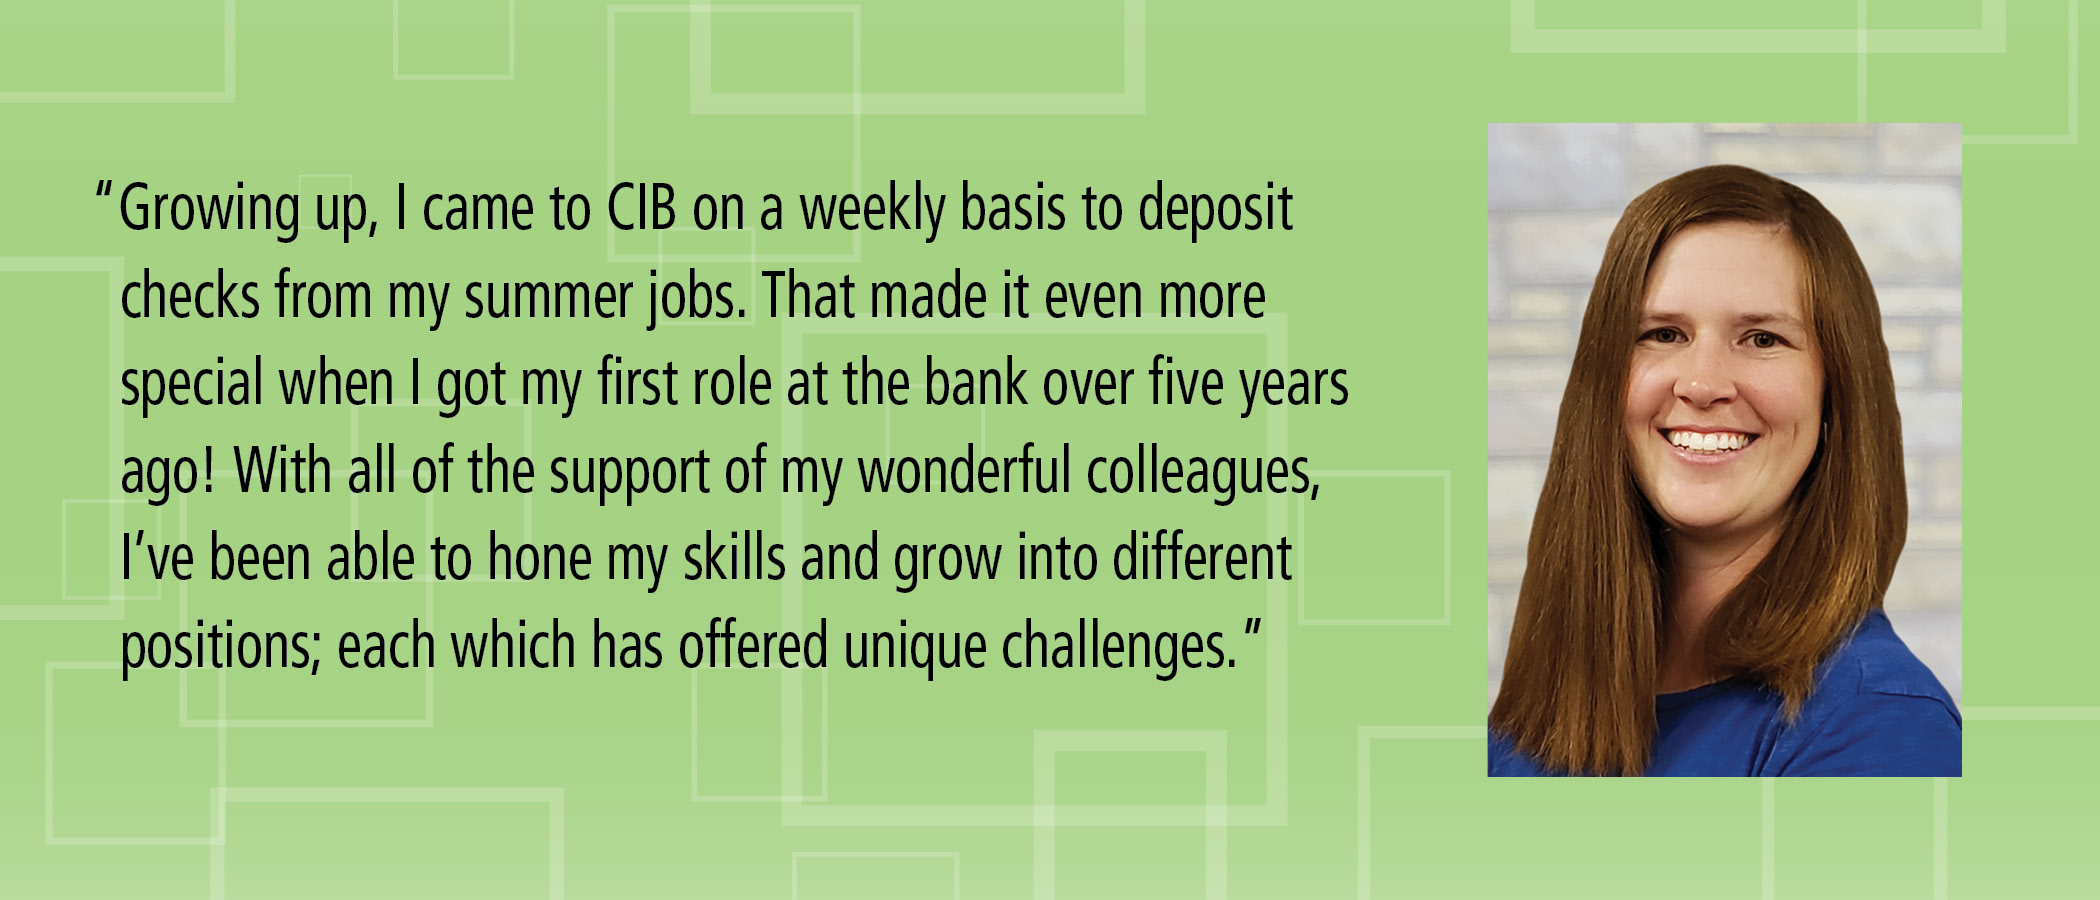 Growing up, I came to CIB on a weekly basis to deposit checks from my summer jobs. That made it even more special when I got my first role at the bank over five years ago! With all of the support of my wonderful colleagues, I?ve been able to hone my skills and grow into different positions; each which has offered unique challenges.